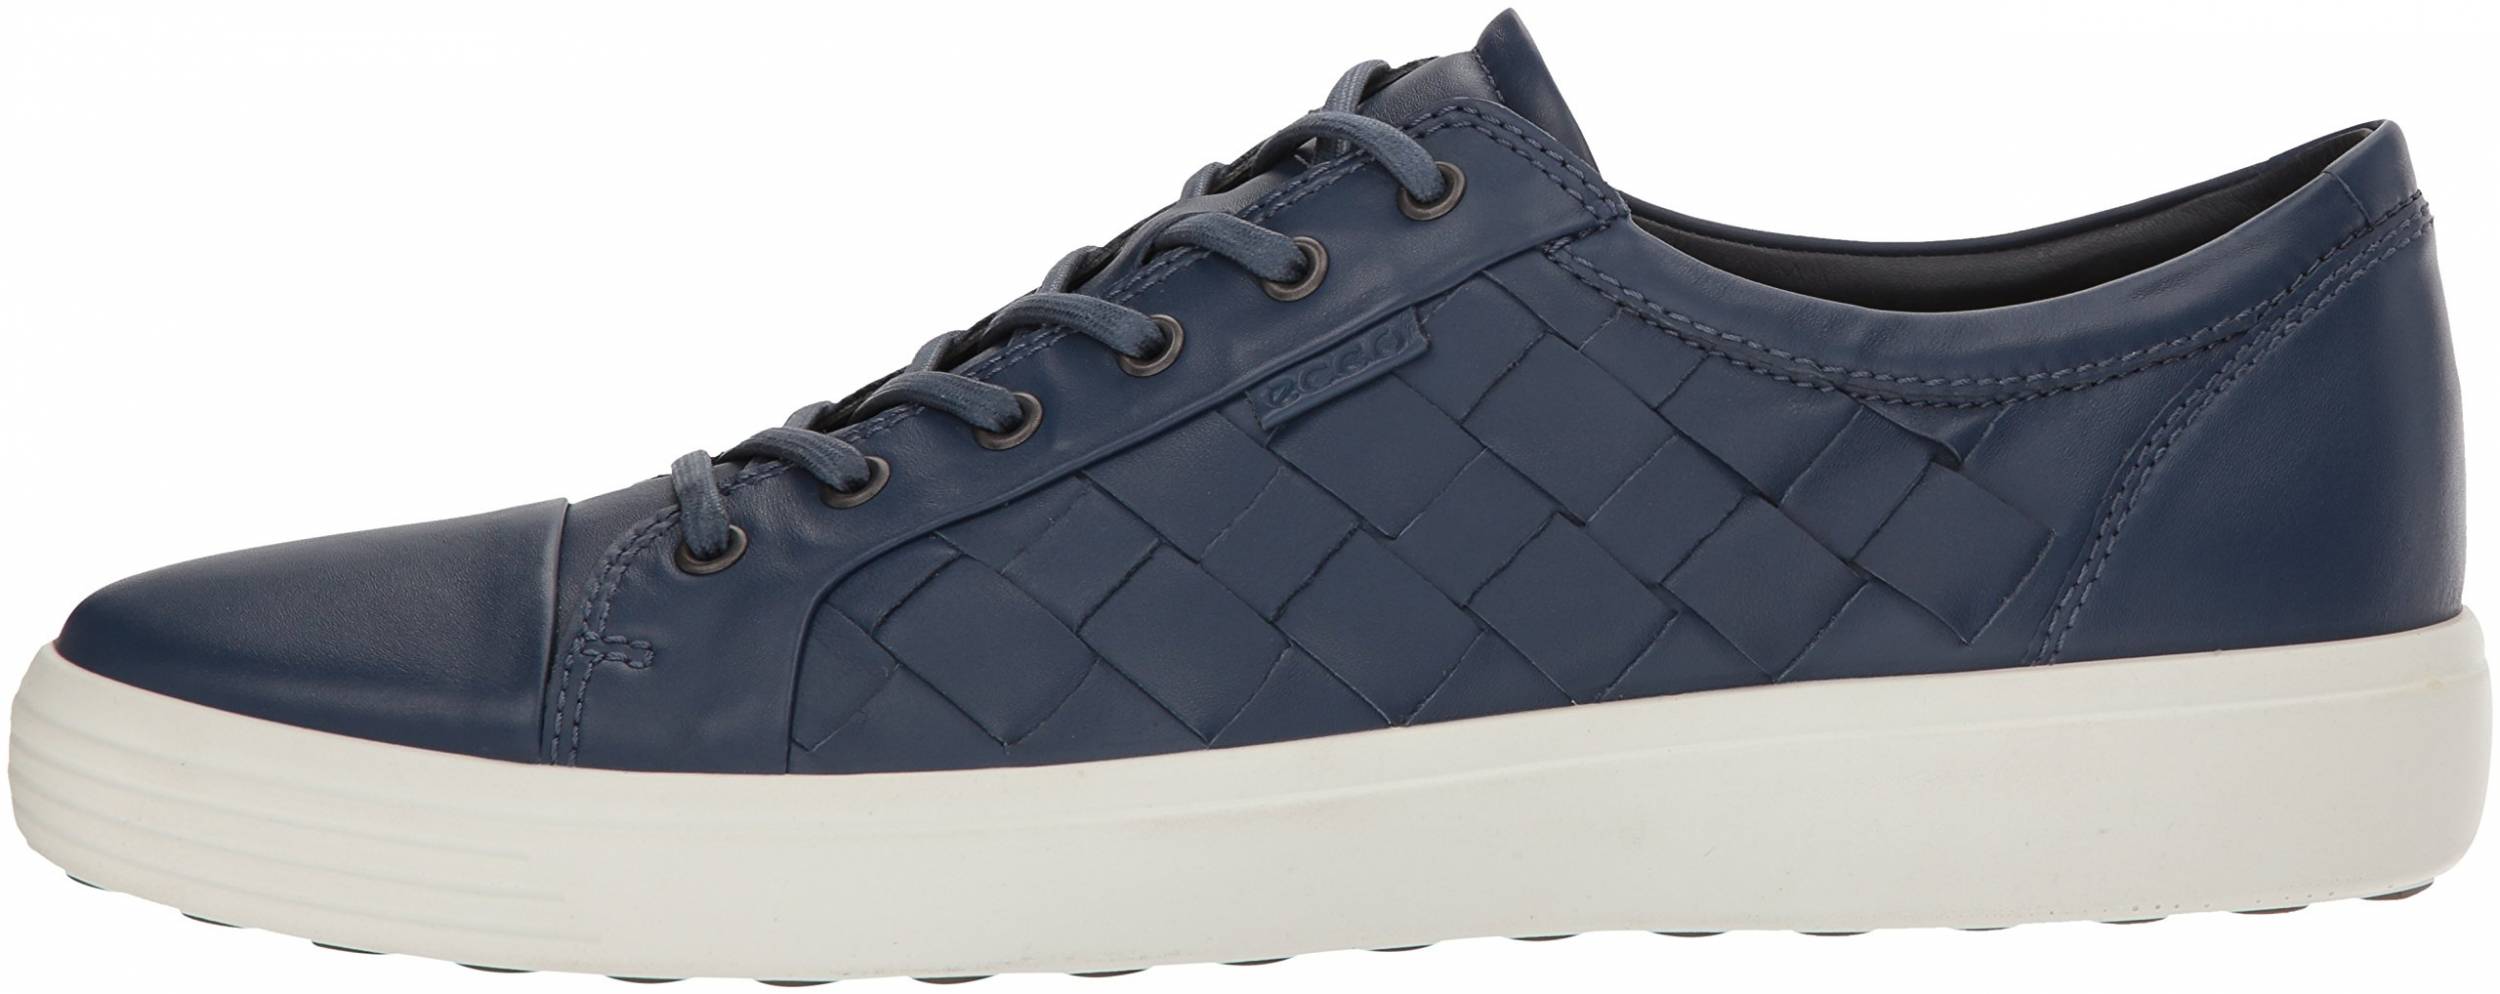 Save 23% on Ecco Sneakers (44 Models in 